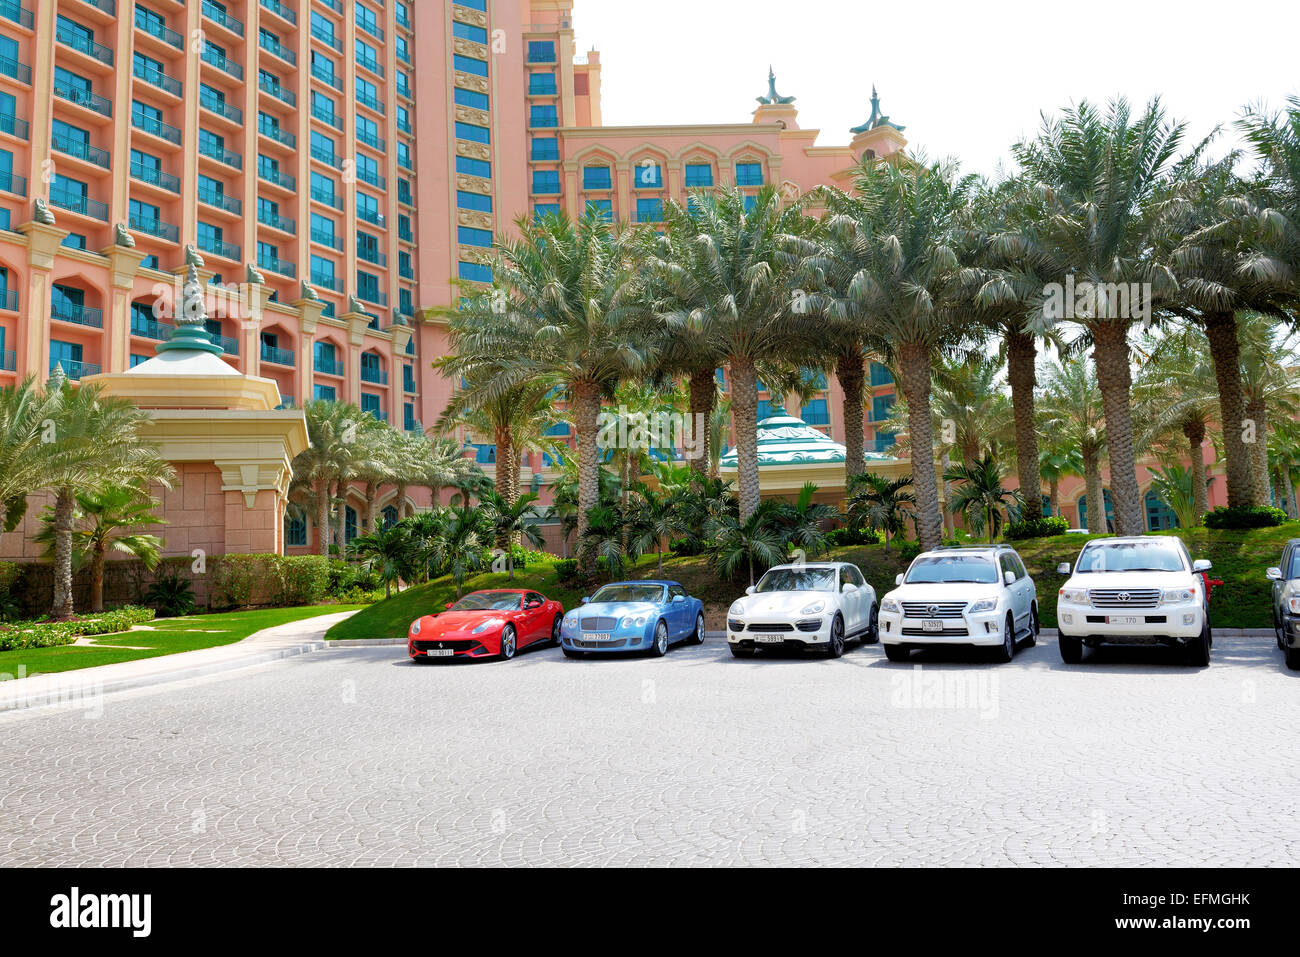 The Atlantis the Palm hotel and limousines. It is located on man-made island Palm Jumeirah Stock Photo